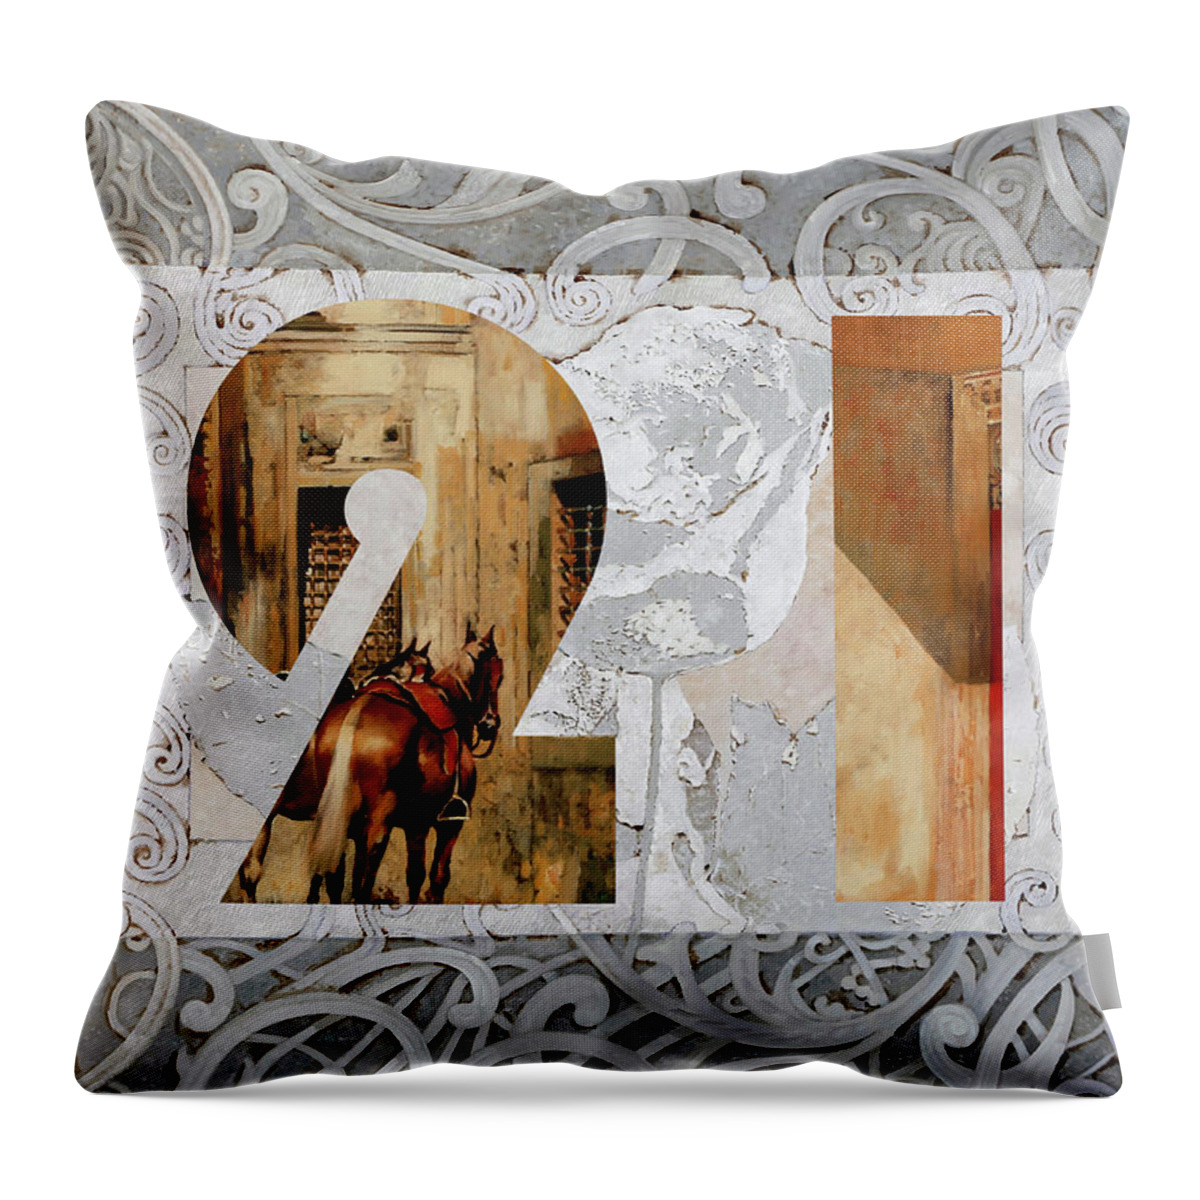 21 Throw Pillow featuring the painting 21 by Guido Borelli